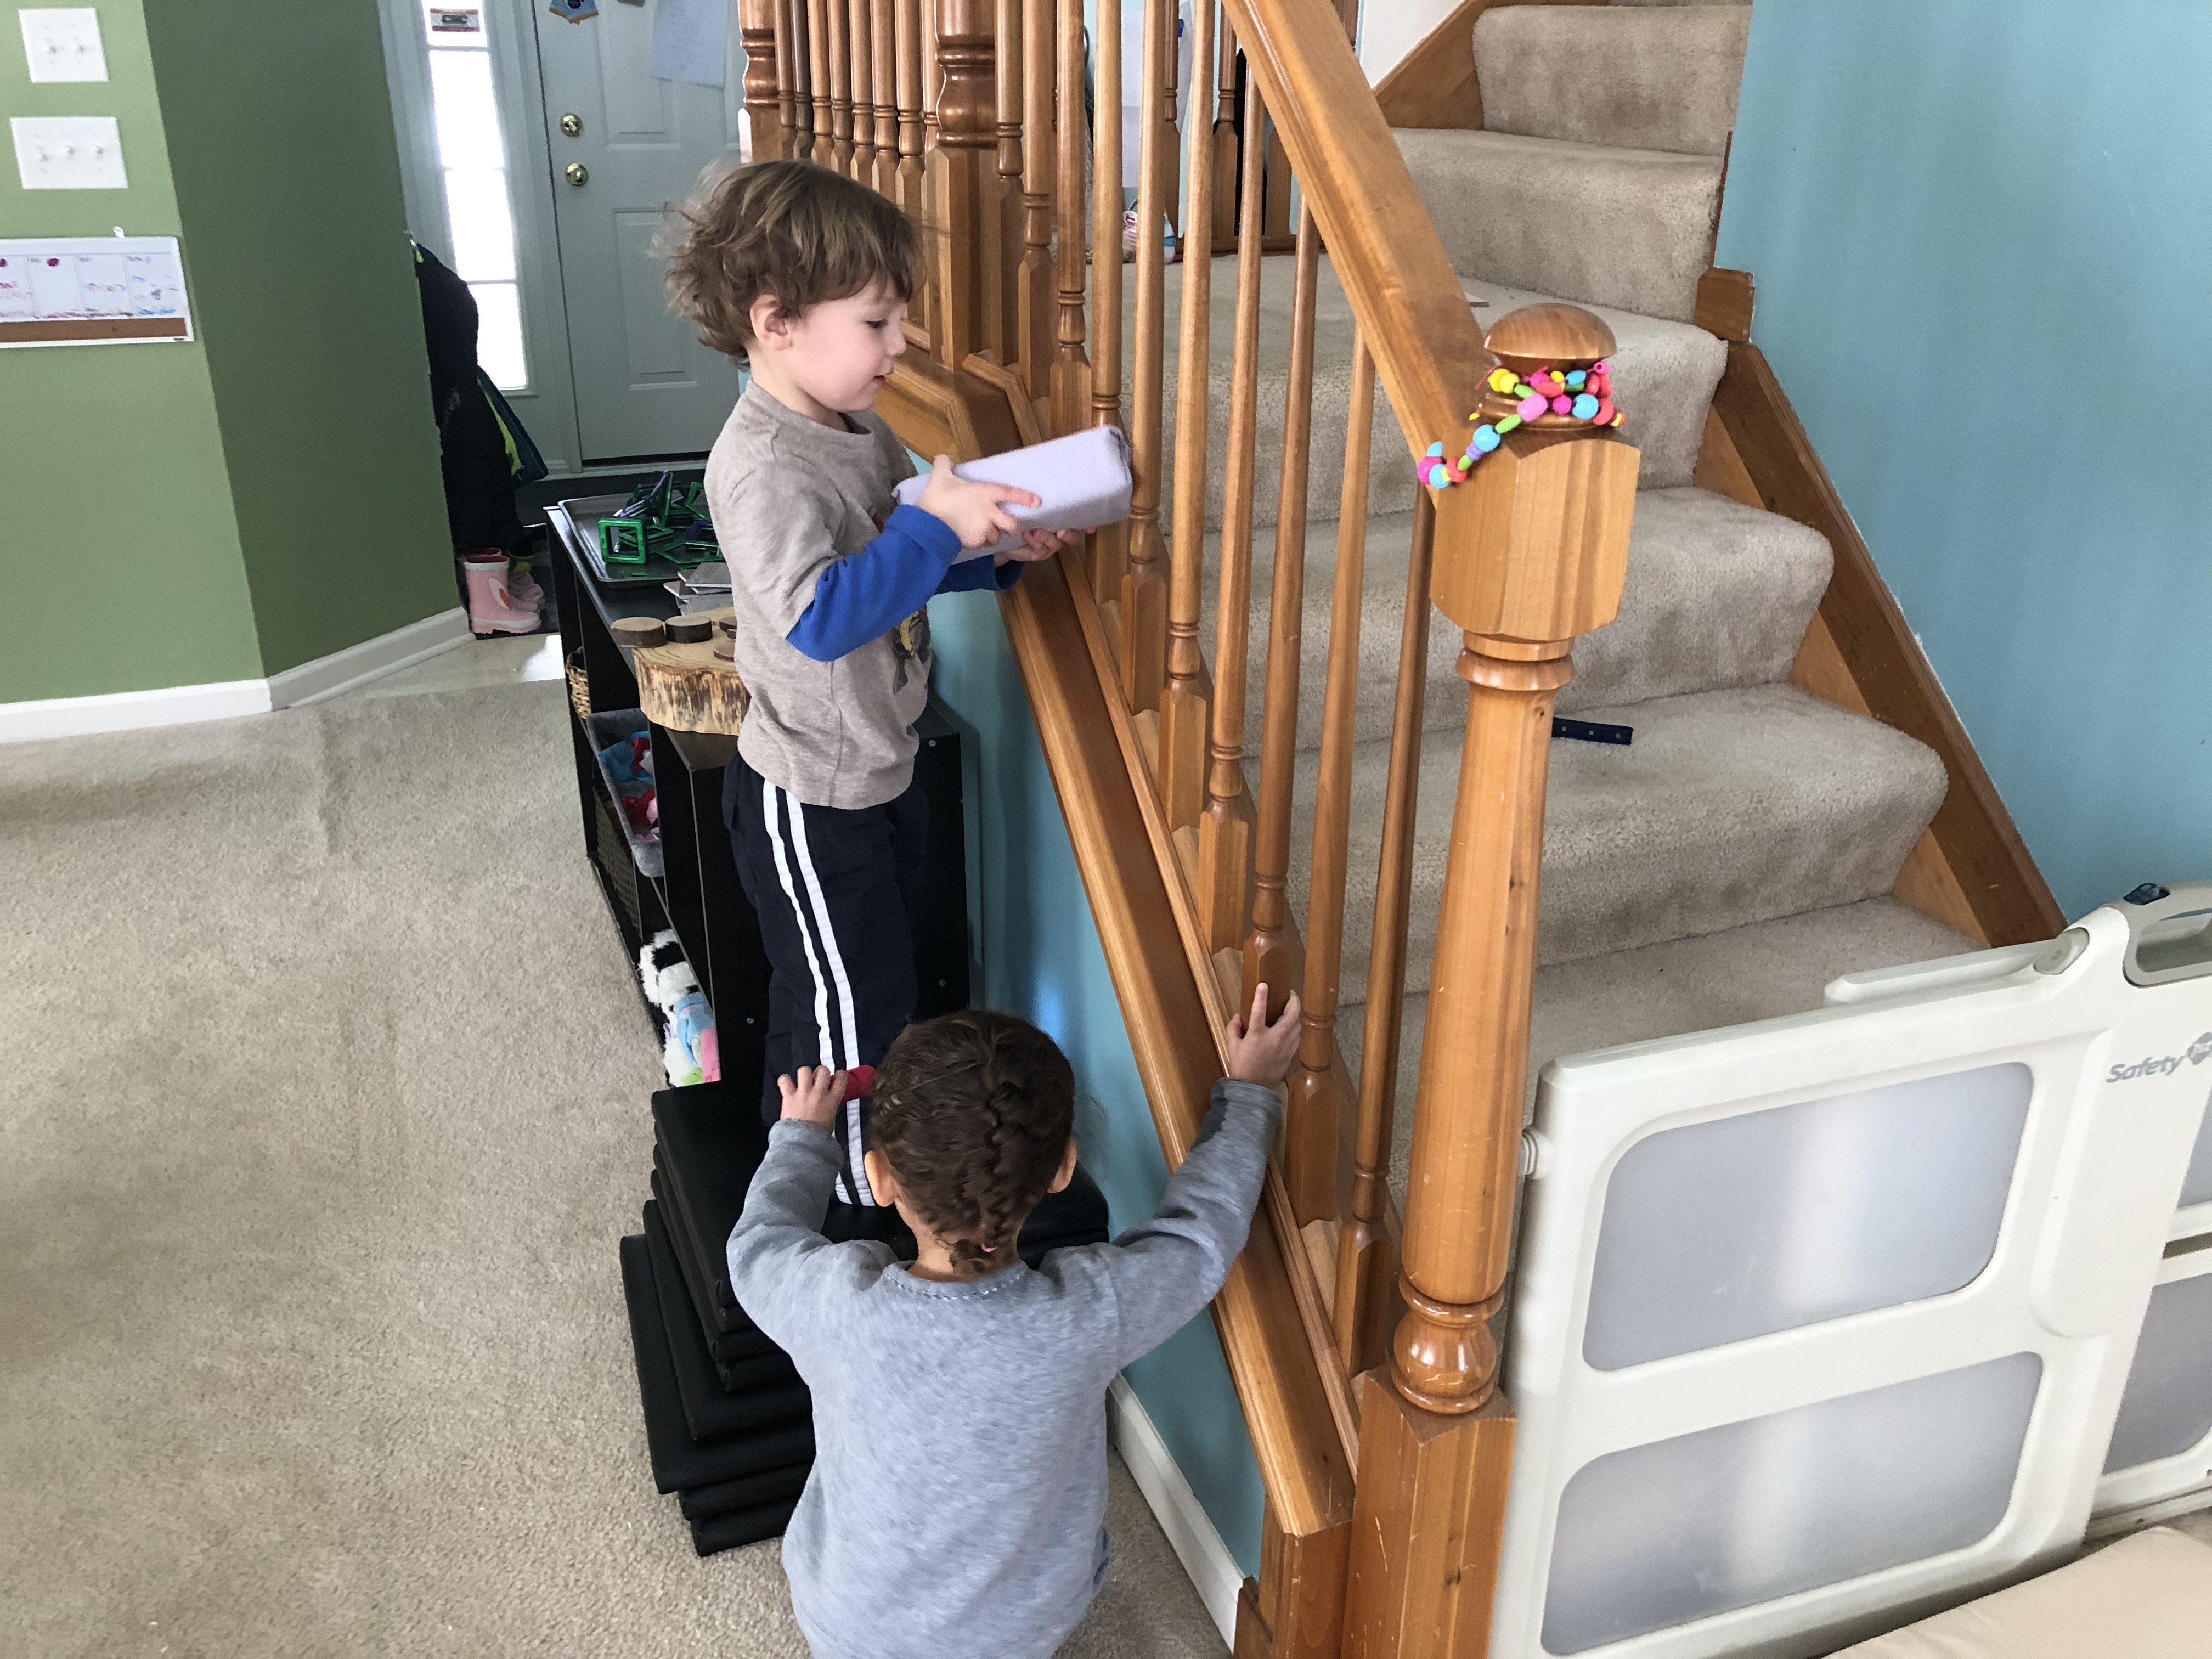 boy trying to fit brick between stair spokes